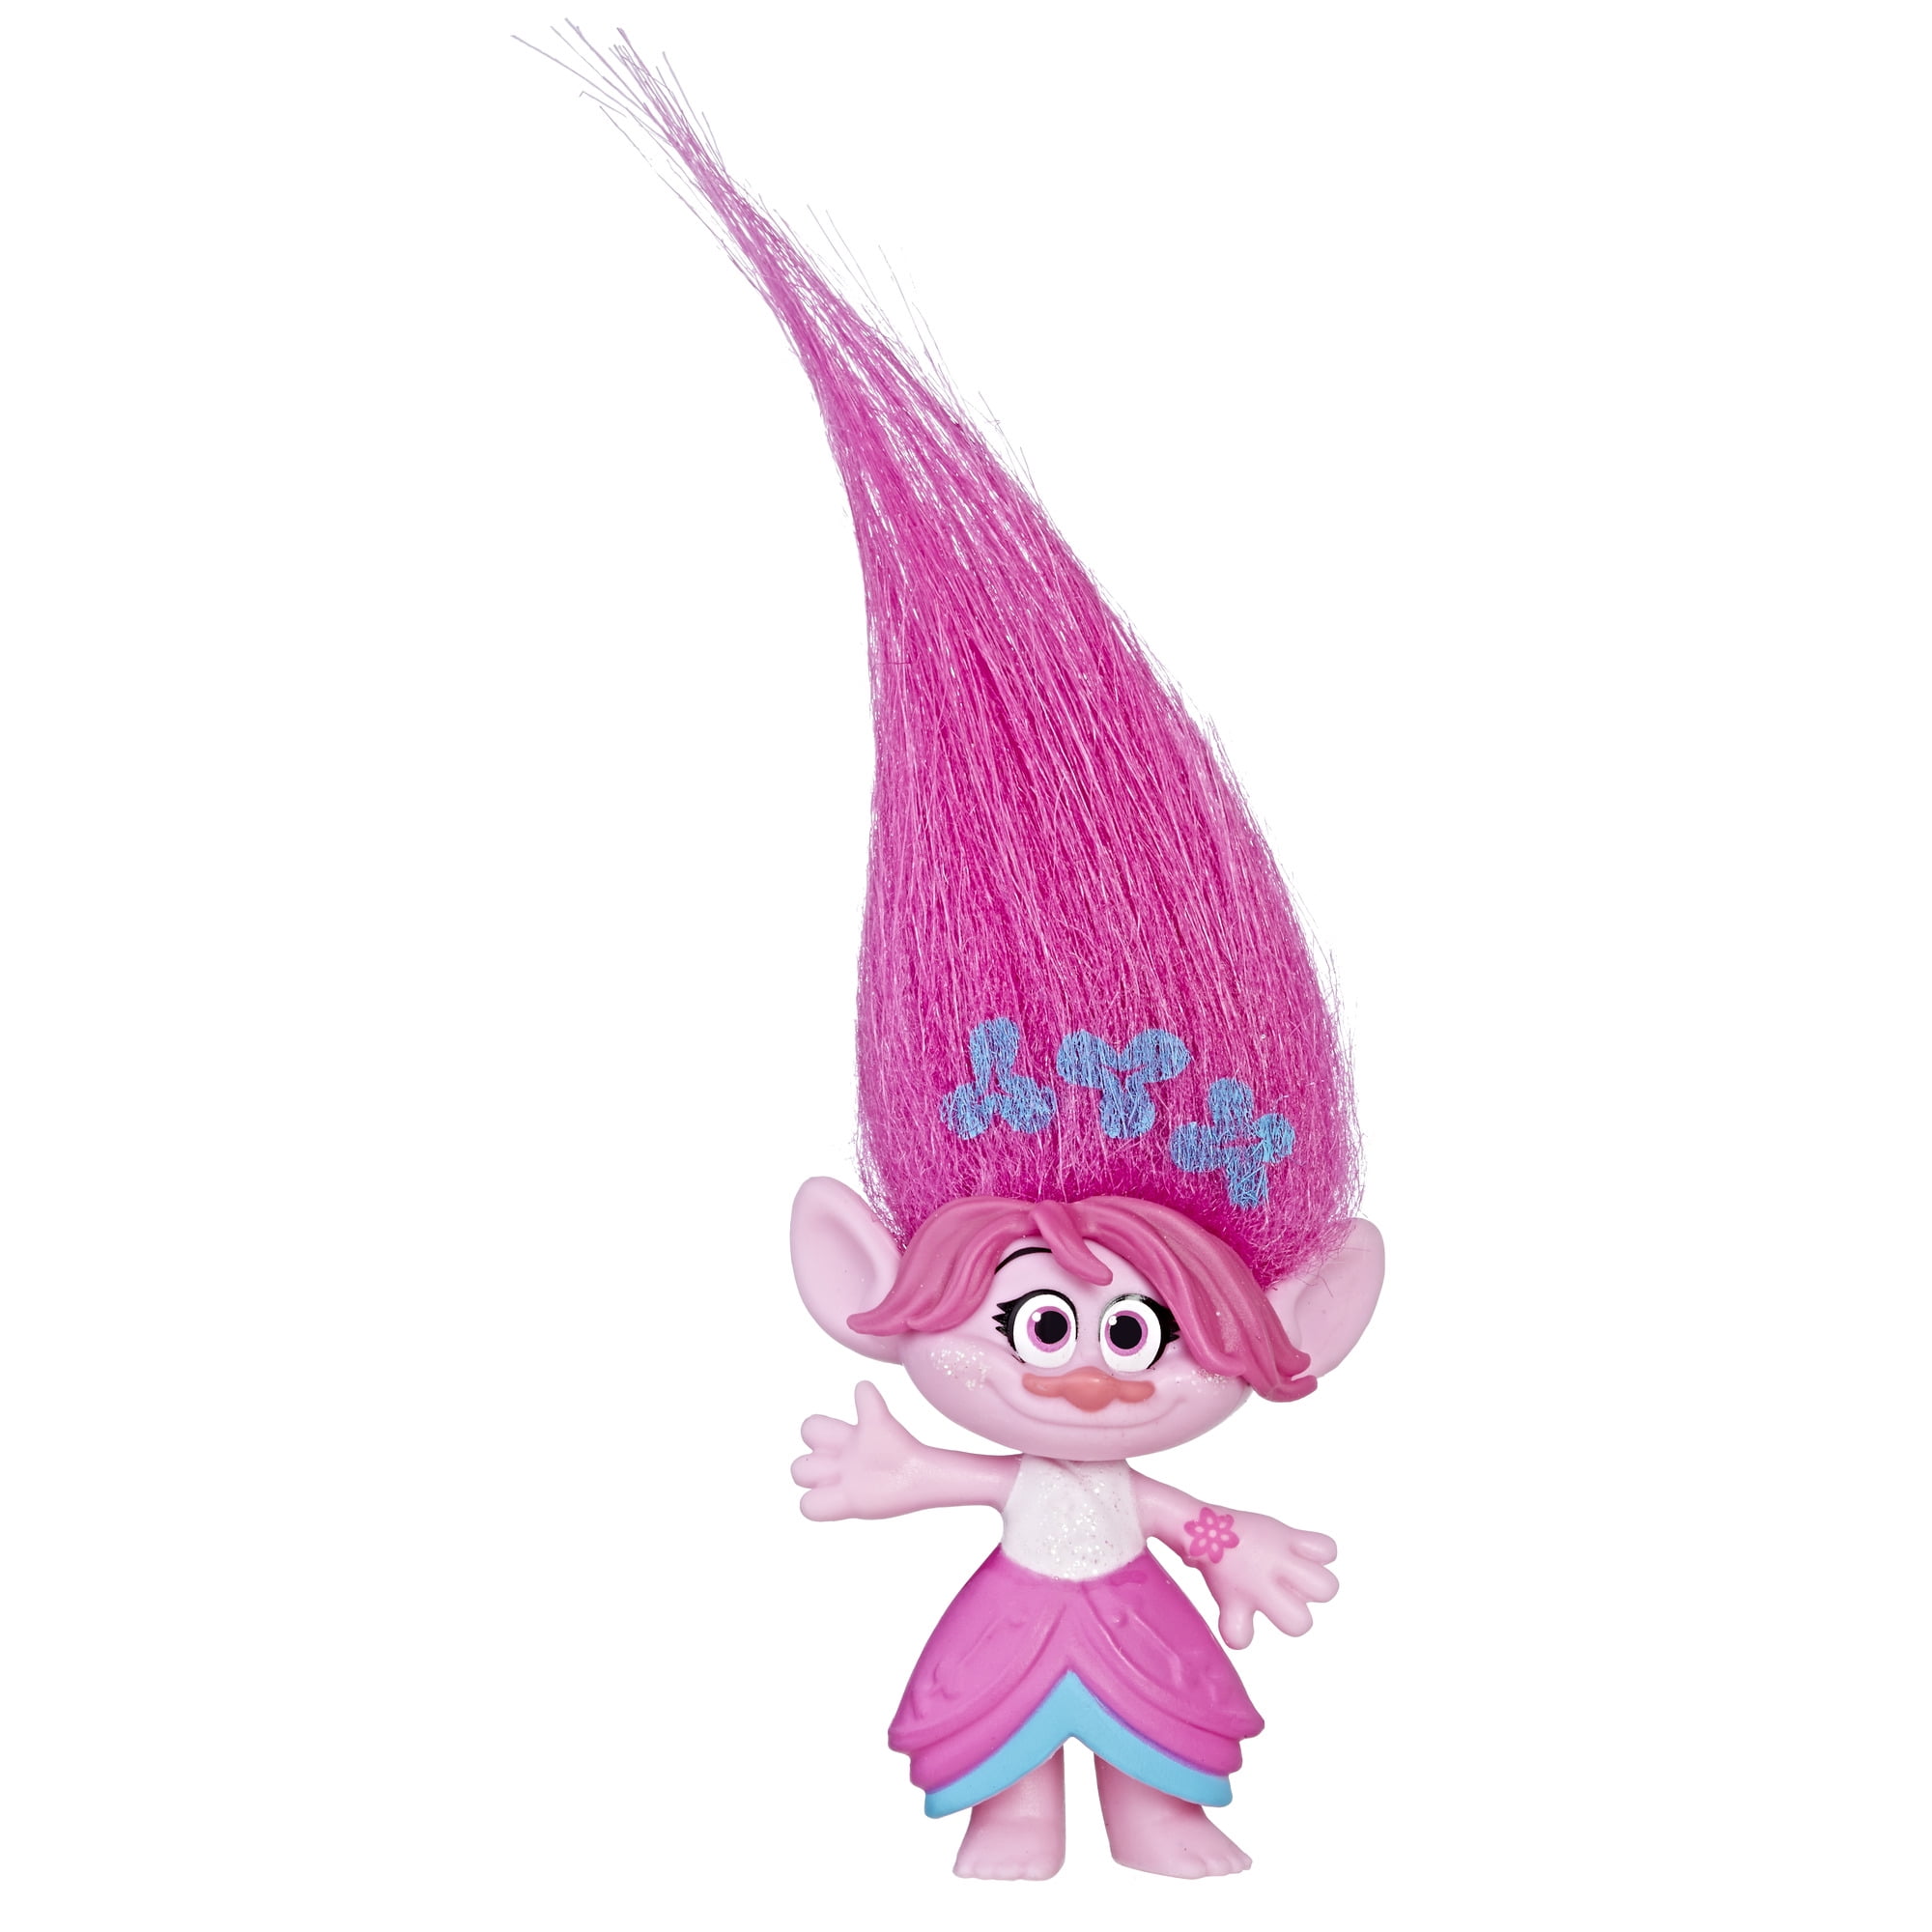 DreamWorks Trolls Branch Collectible Figure with Printed Hair 